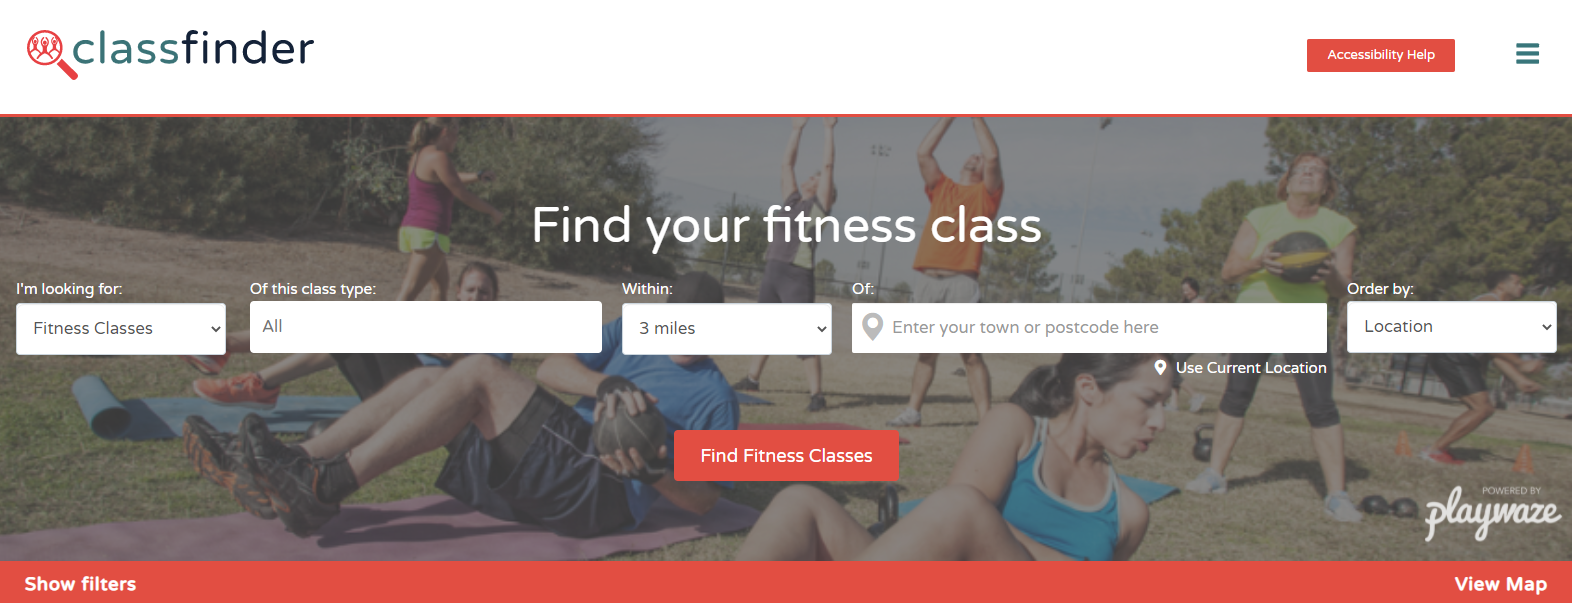 The homepage of classfinder